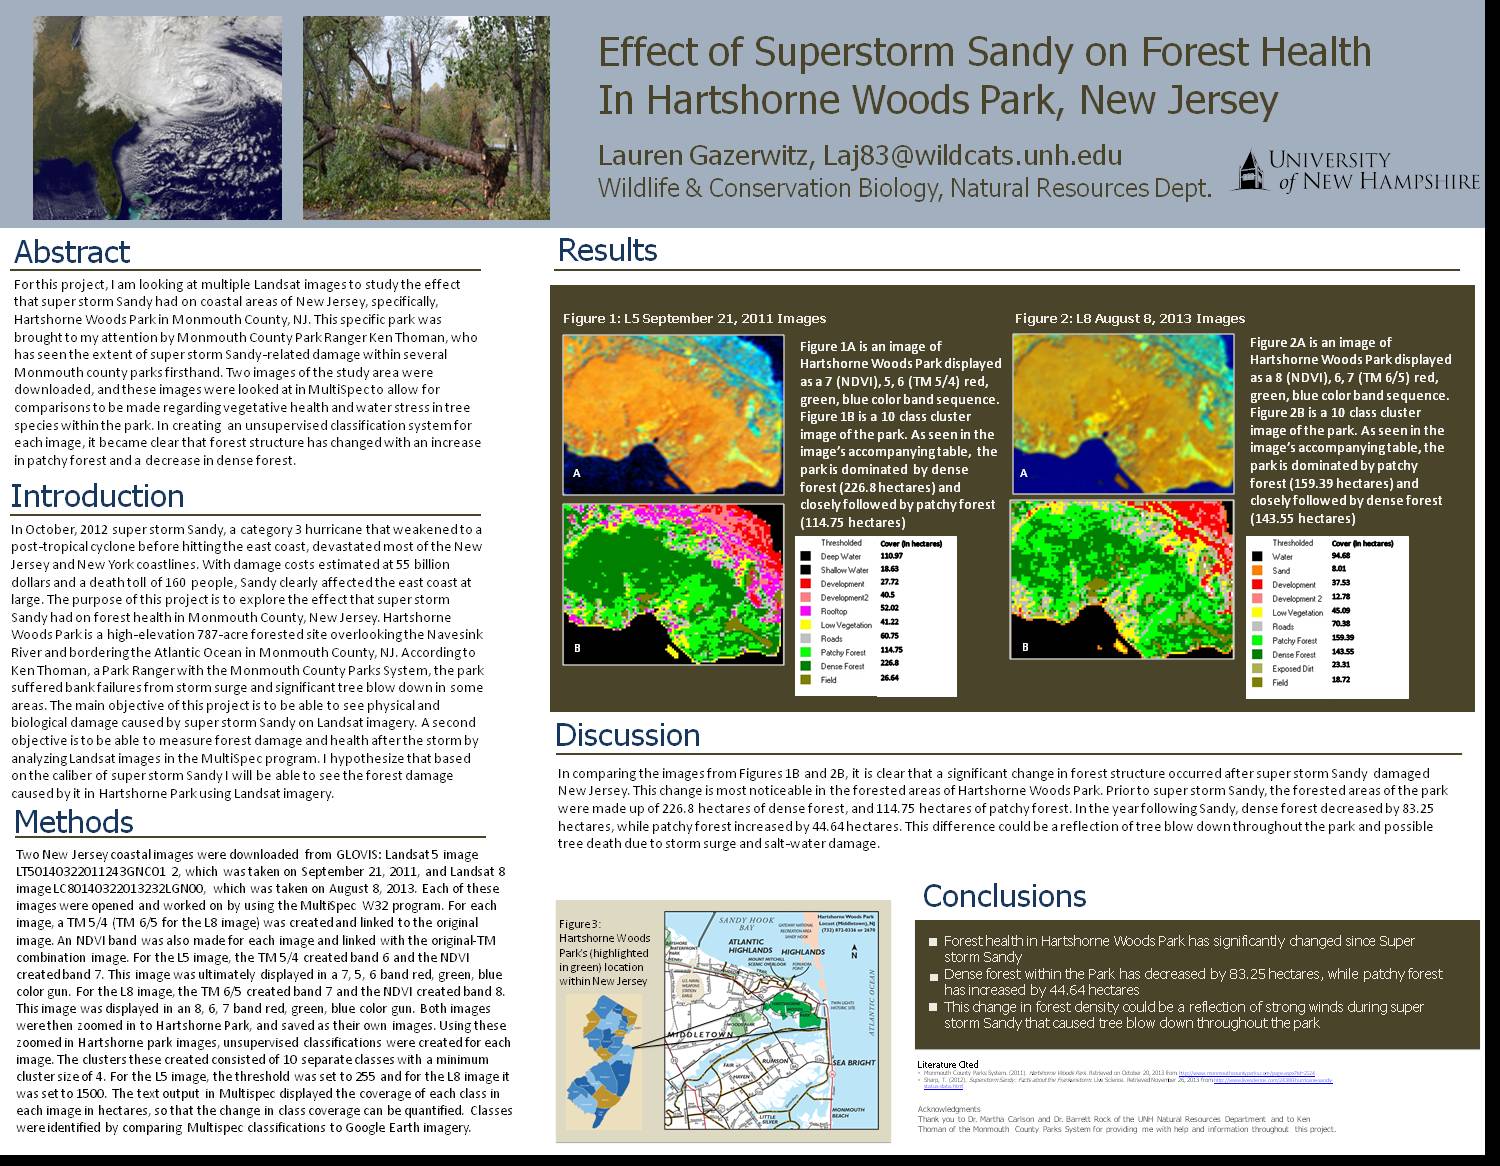 Effect Of Superstorm Sandy On Forest Health In Hartshorne Woods Park, New Jersey by laj83